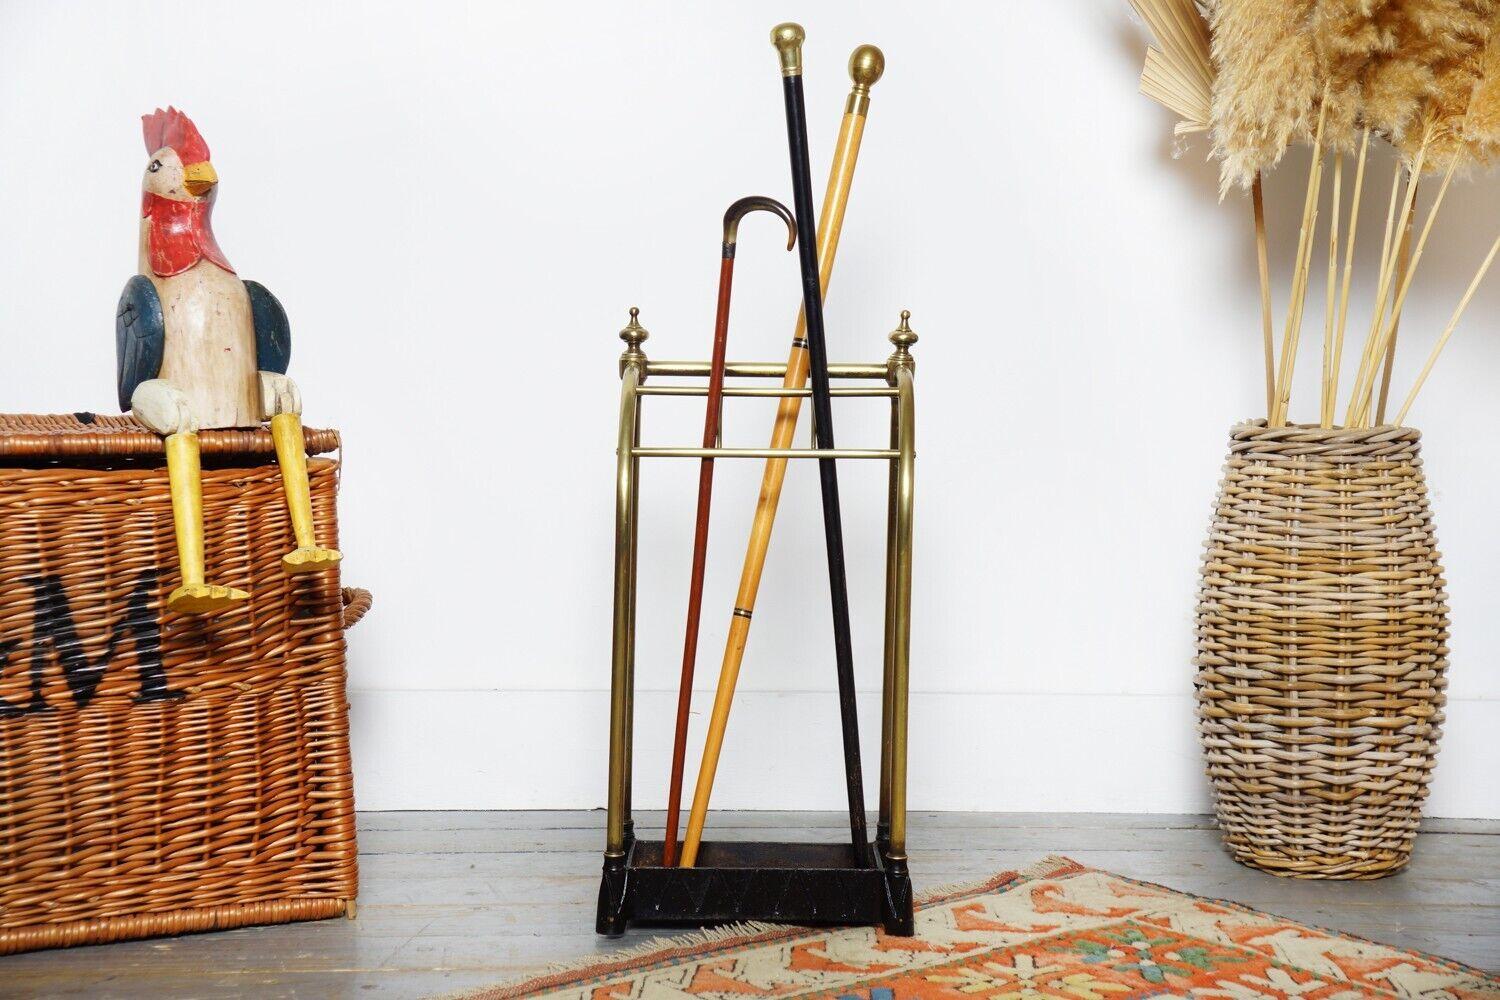 This vintage library step ladder is made of solid pine wood, dating back to the early to mid-20th century. It comes with a grip pole/handle for added stability and convenience. 

This multi-purpose foldable ladder can be used for various purposes,